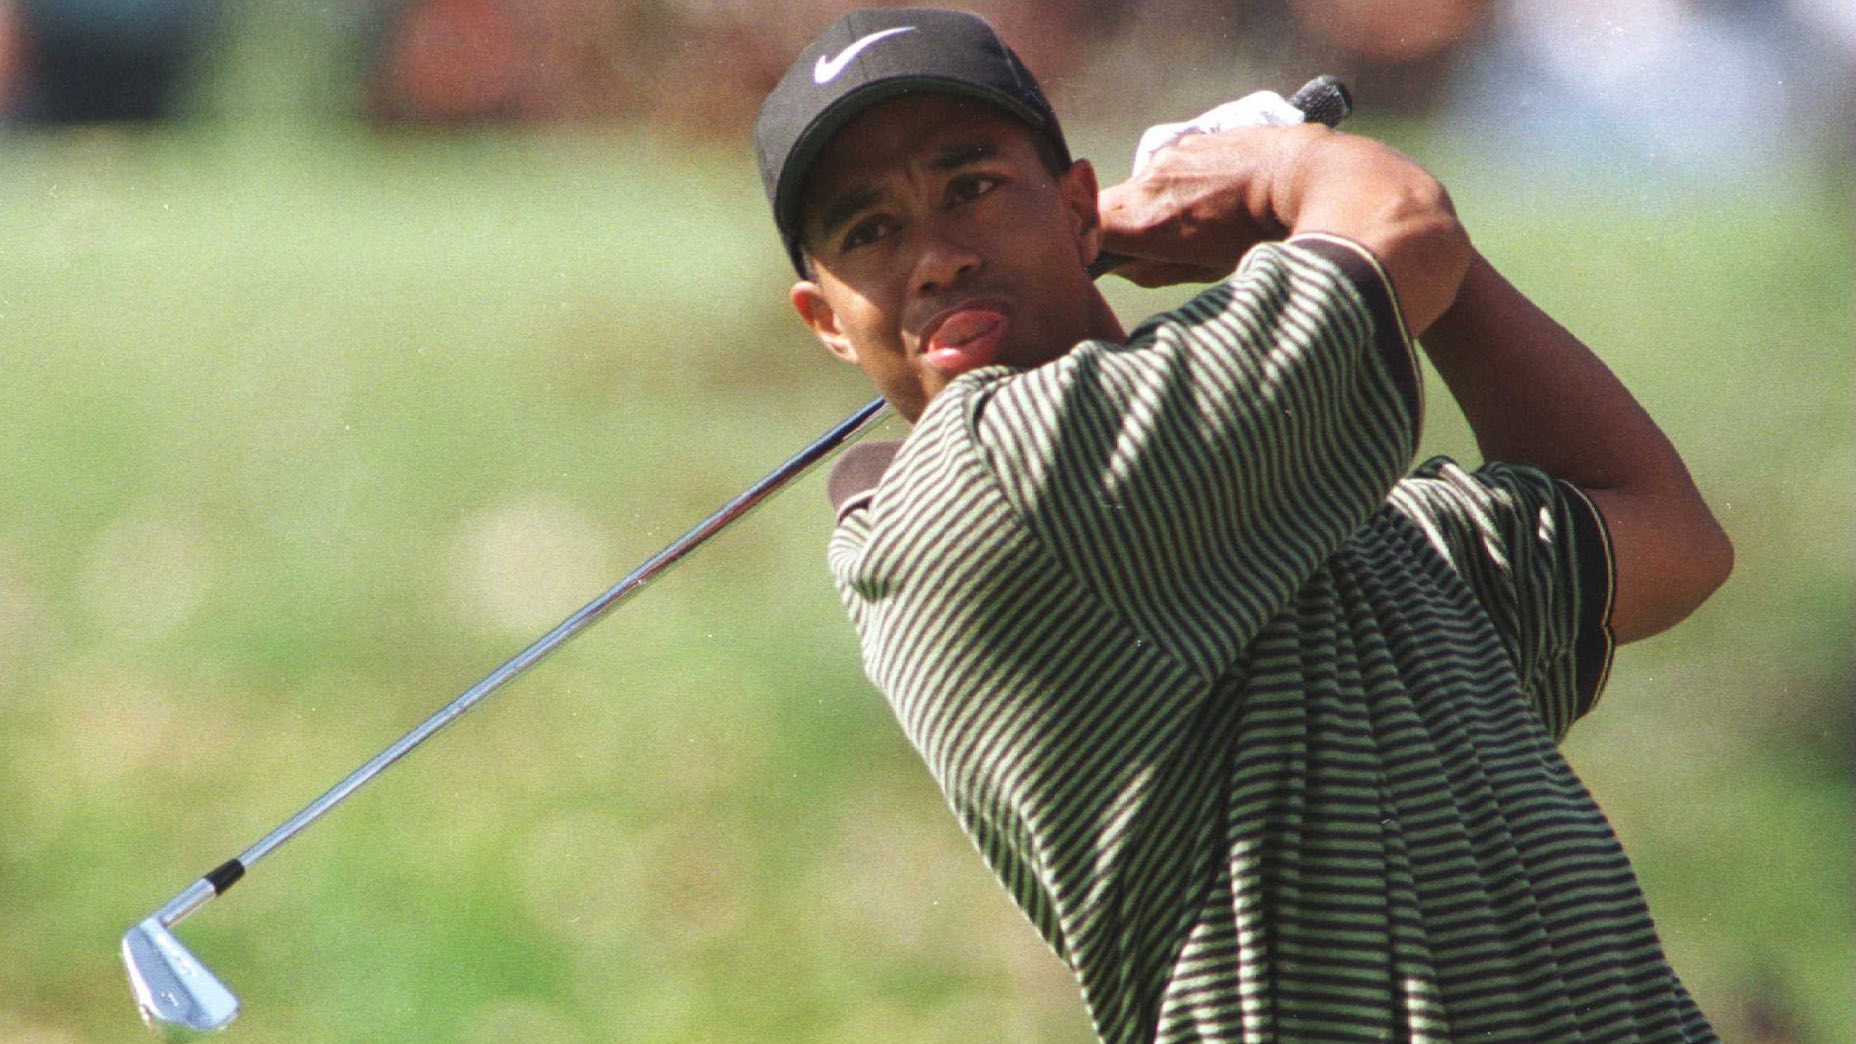 tiger woods hits a shot during a pro tournament in 1996 equipment